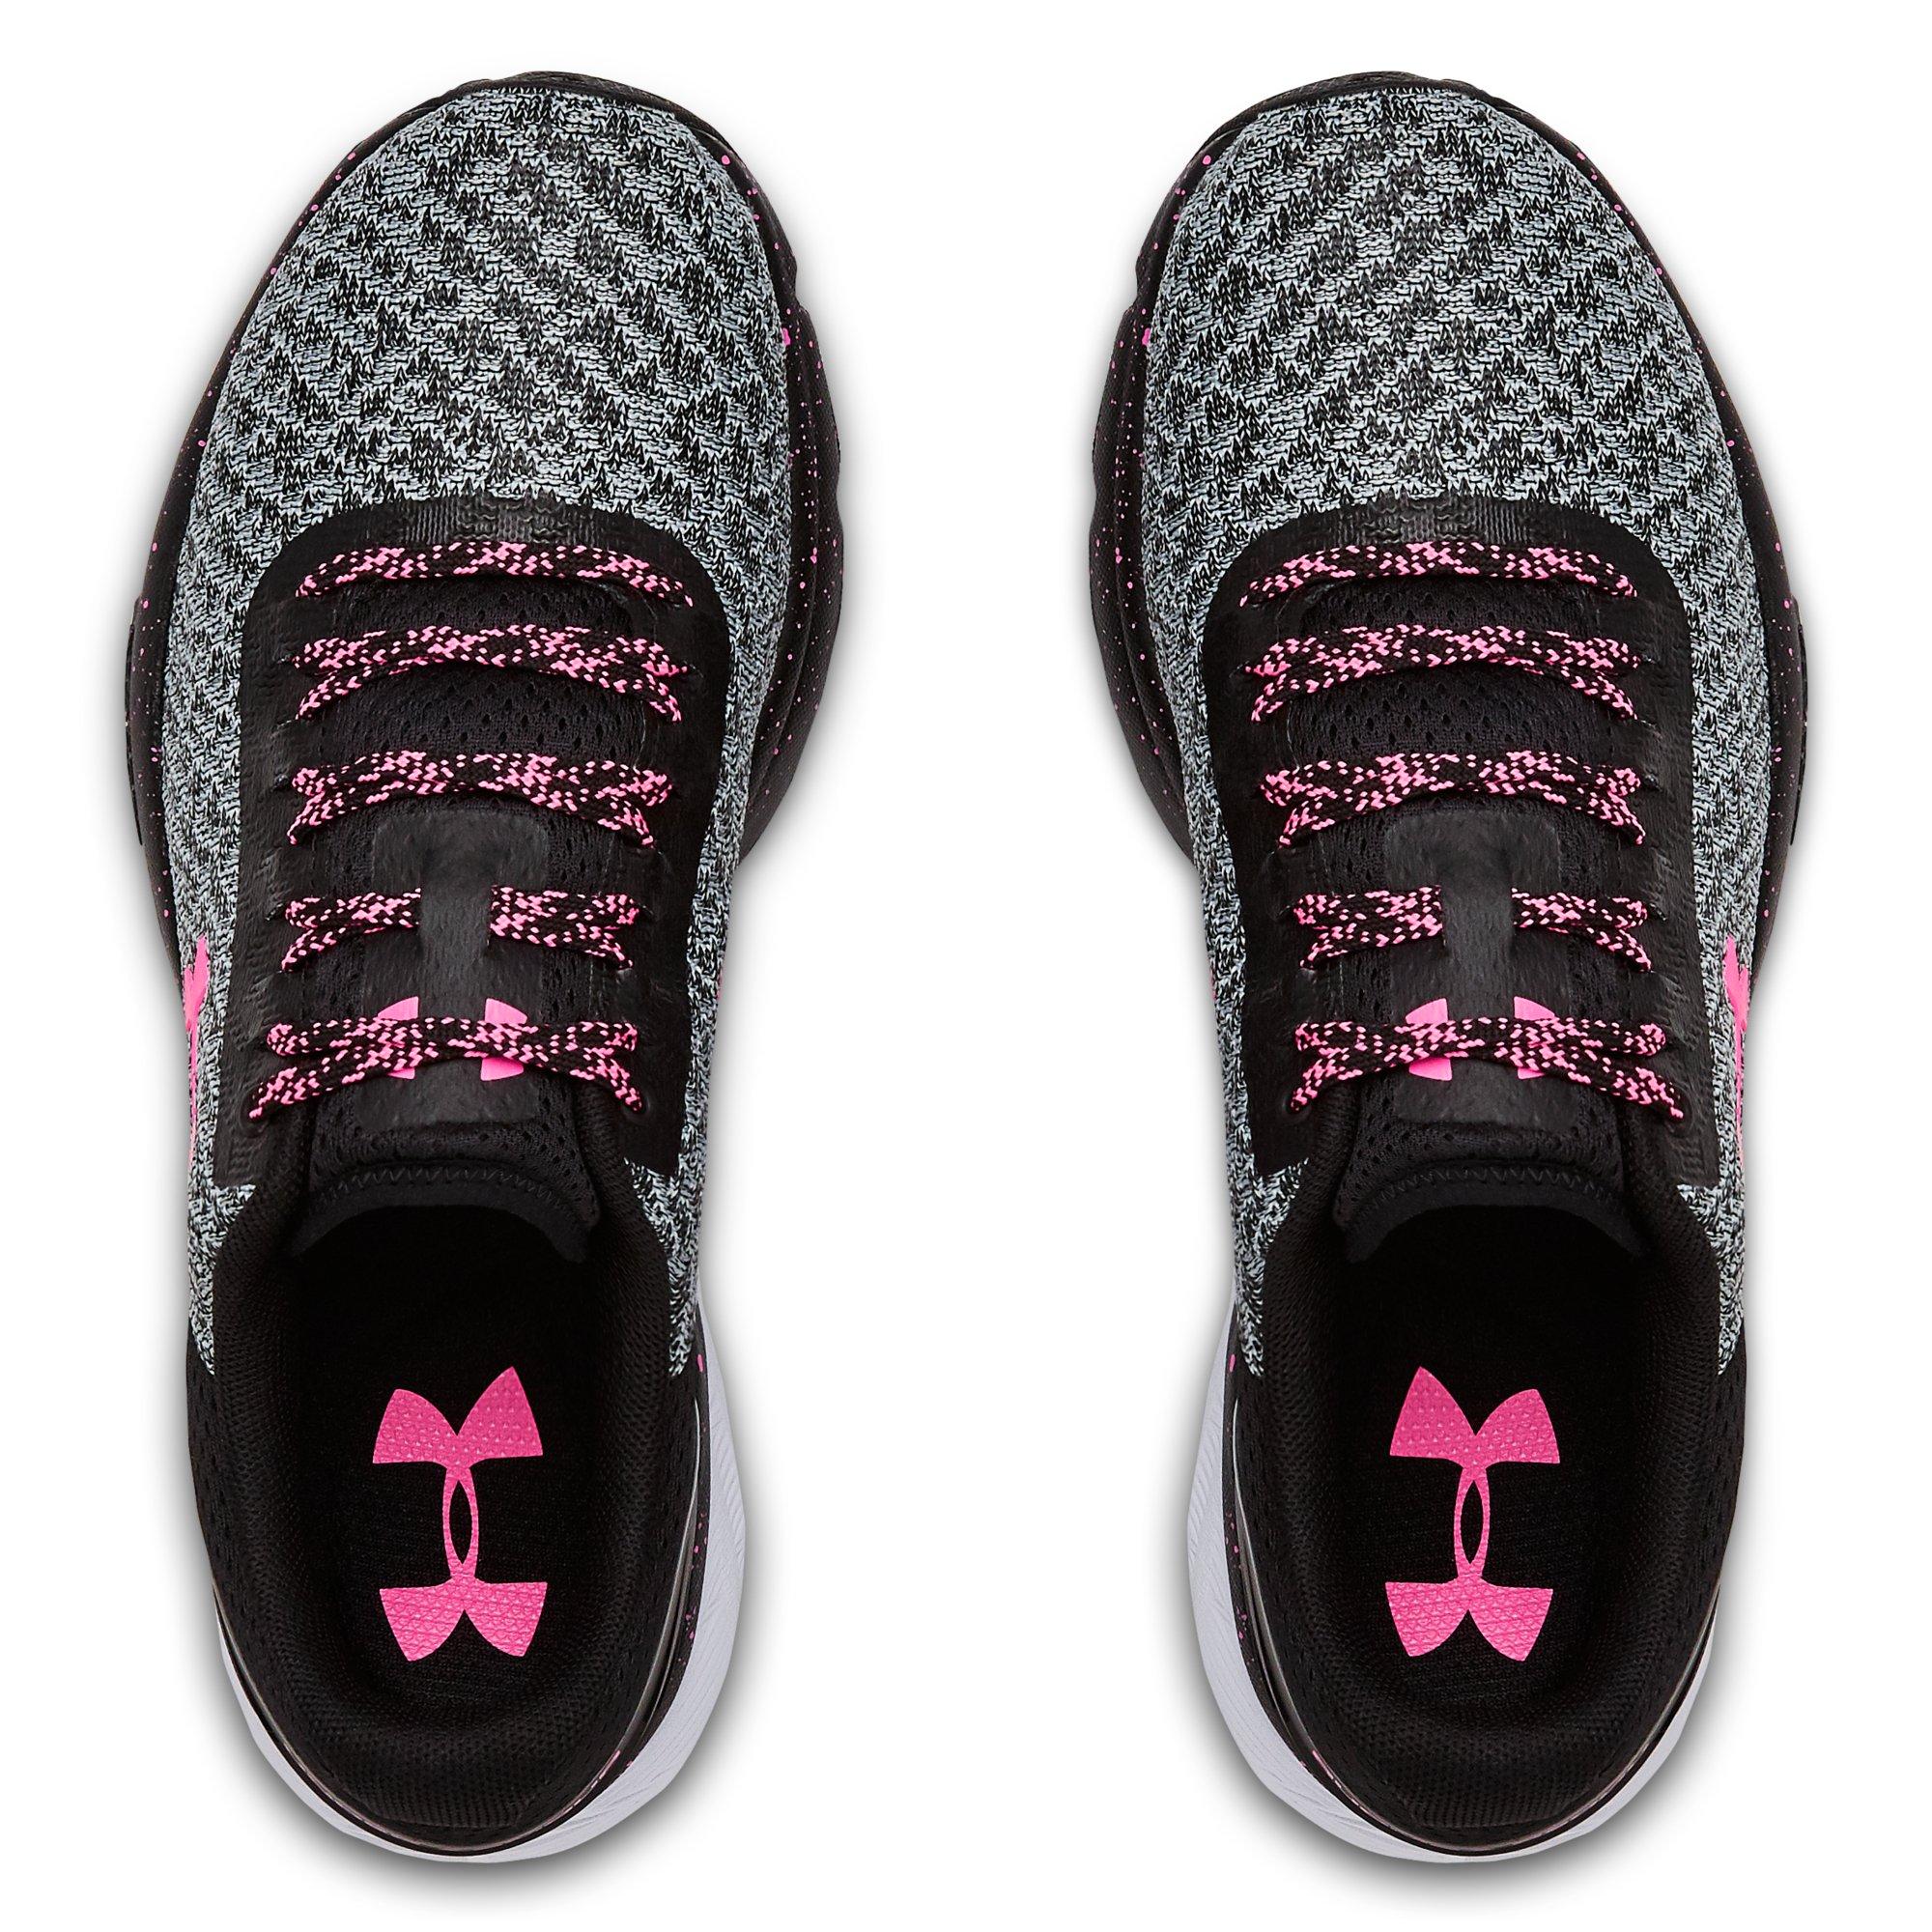 under armour charged escape 2 women's running shoes